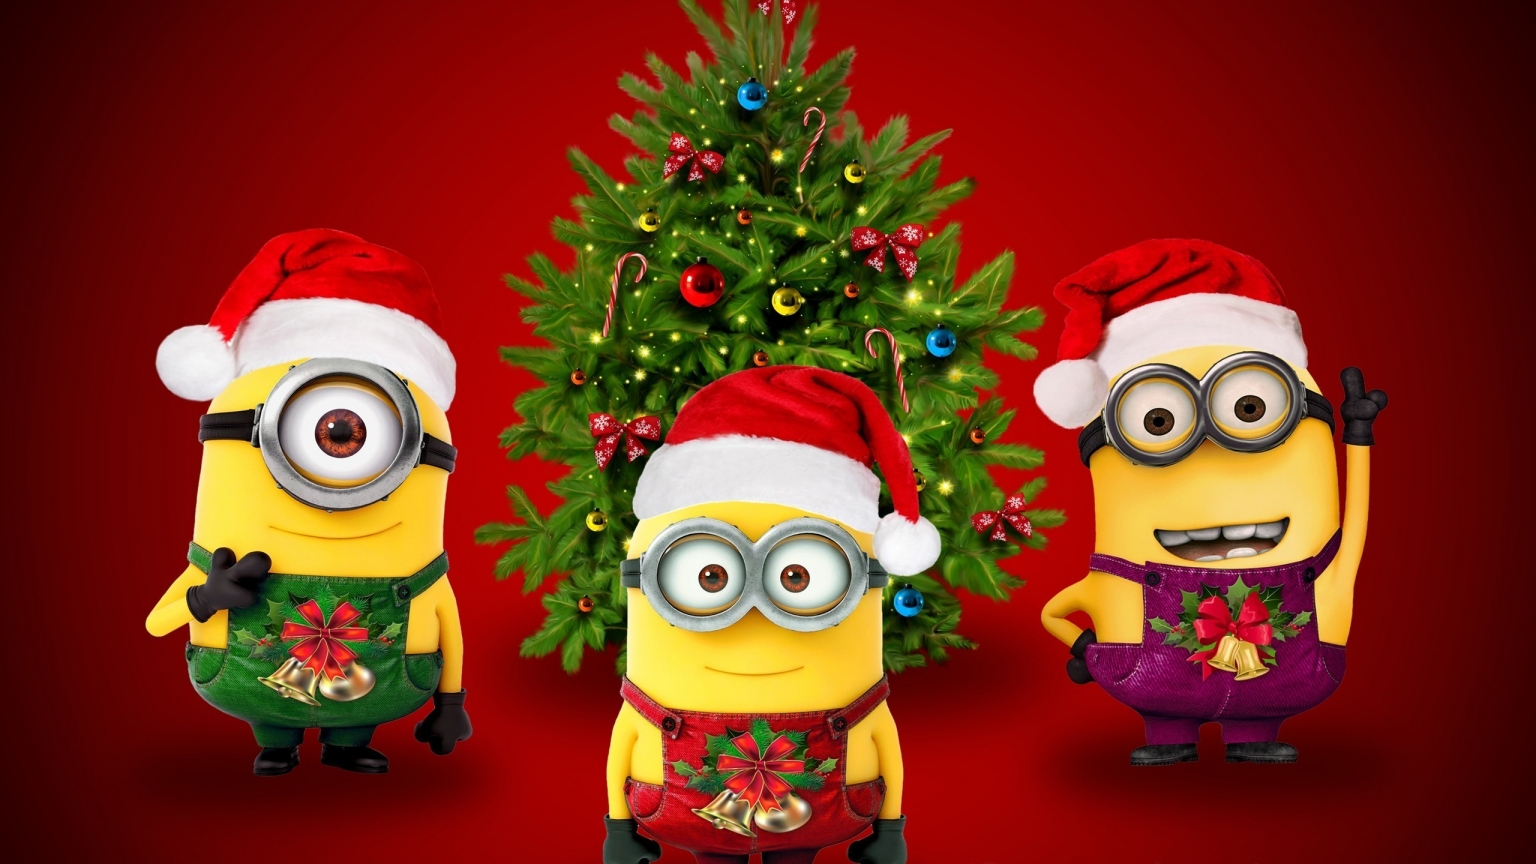 Christmas & Minions for 1536 x 864 HDTV resolution